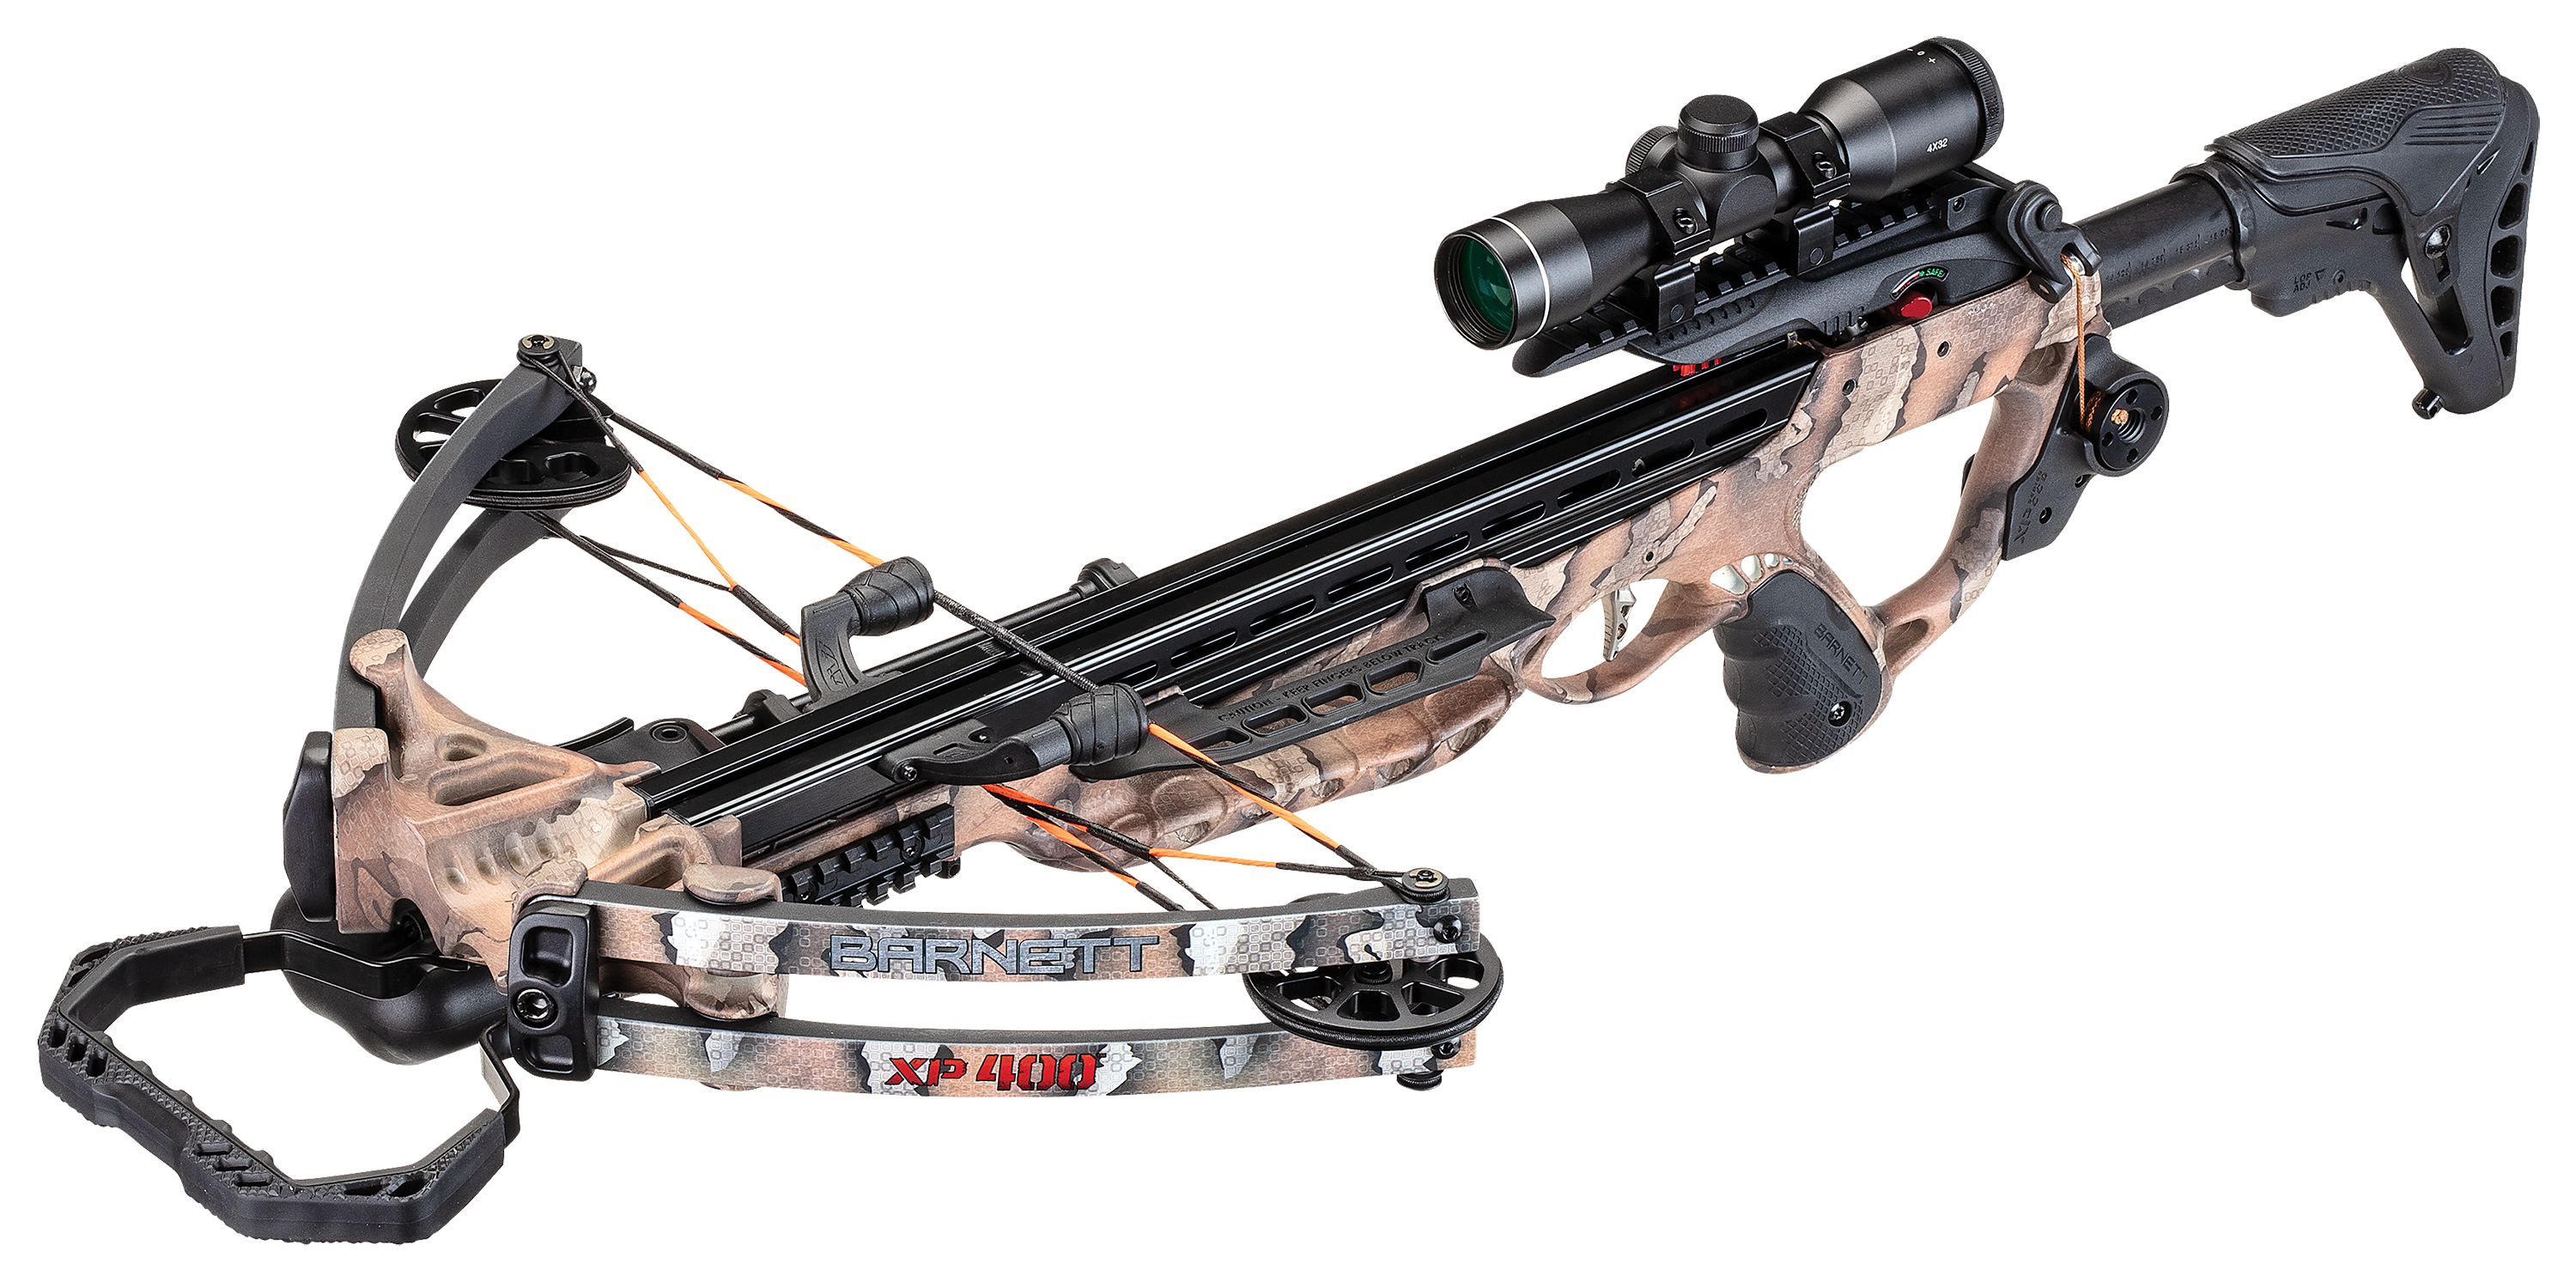 Barnett XP400 Crossbow Package with Crank Cocking Device